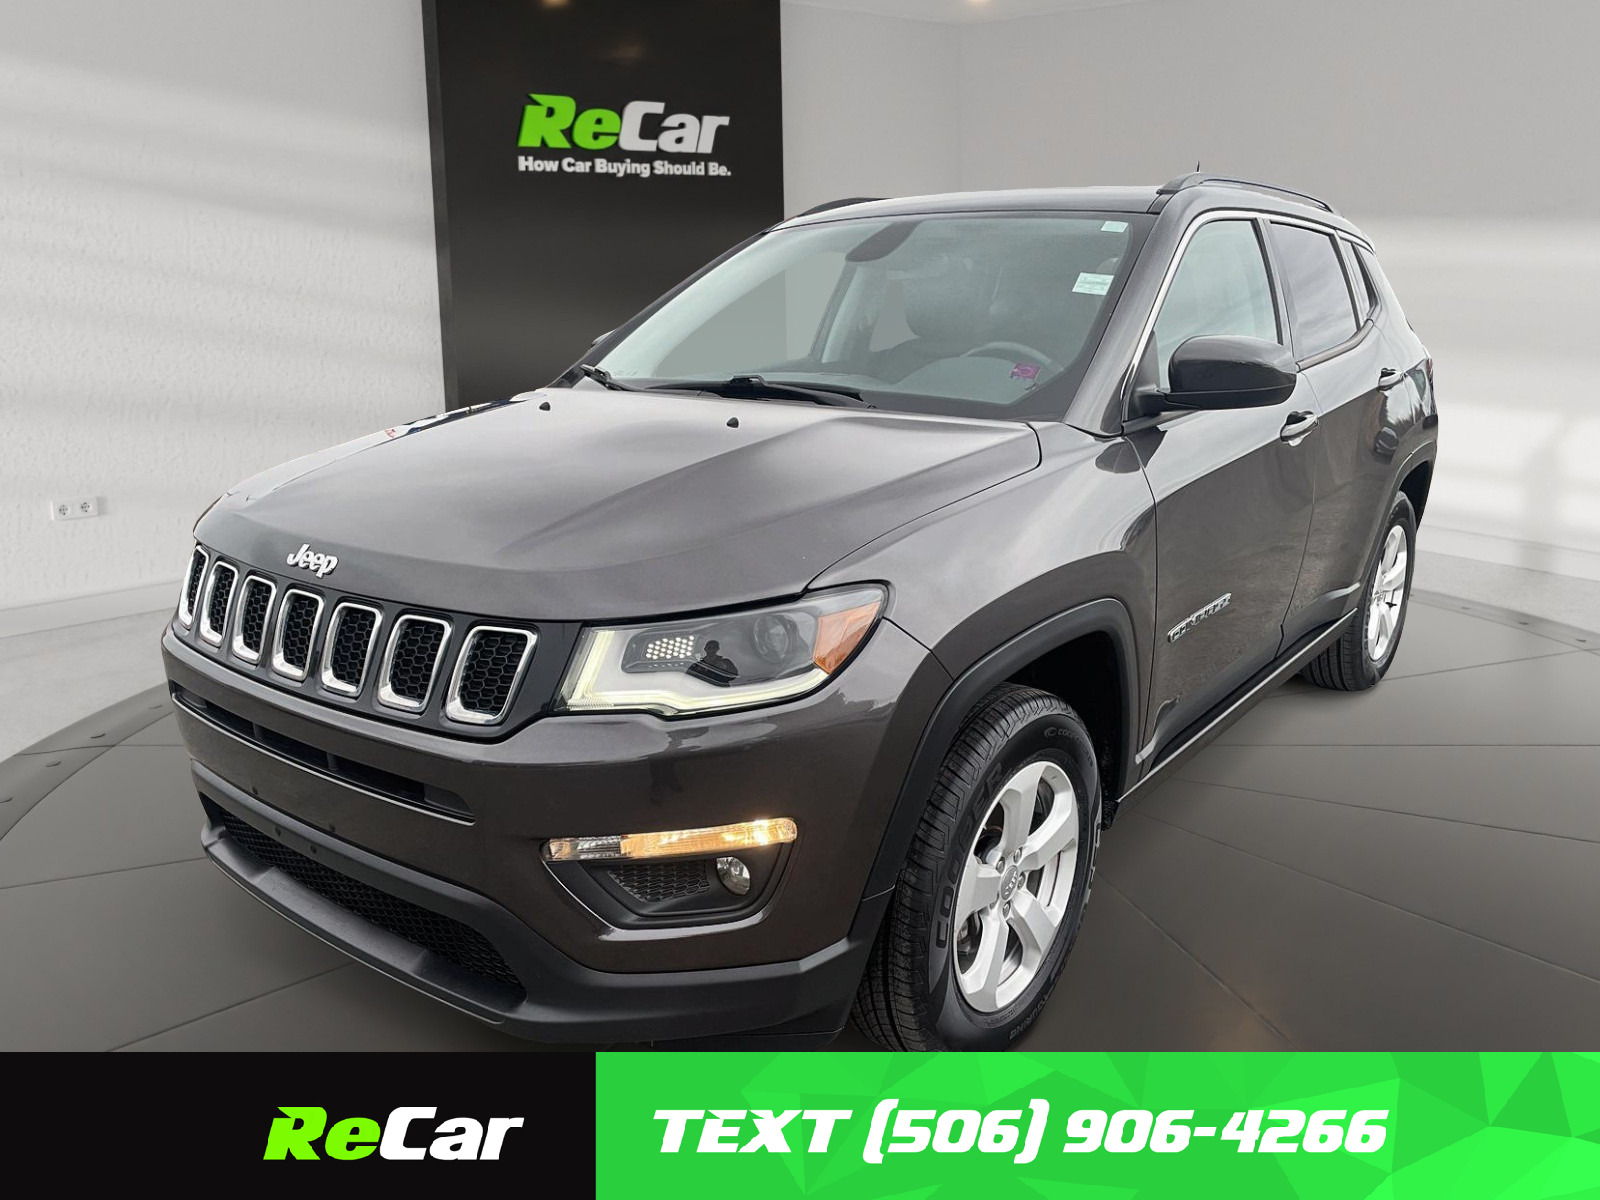 2020 Jeep Compass 4X4 | Sunroof | Heated Leather Seats | Dual Climat